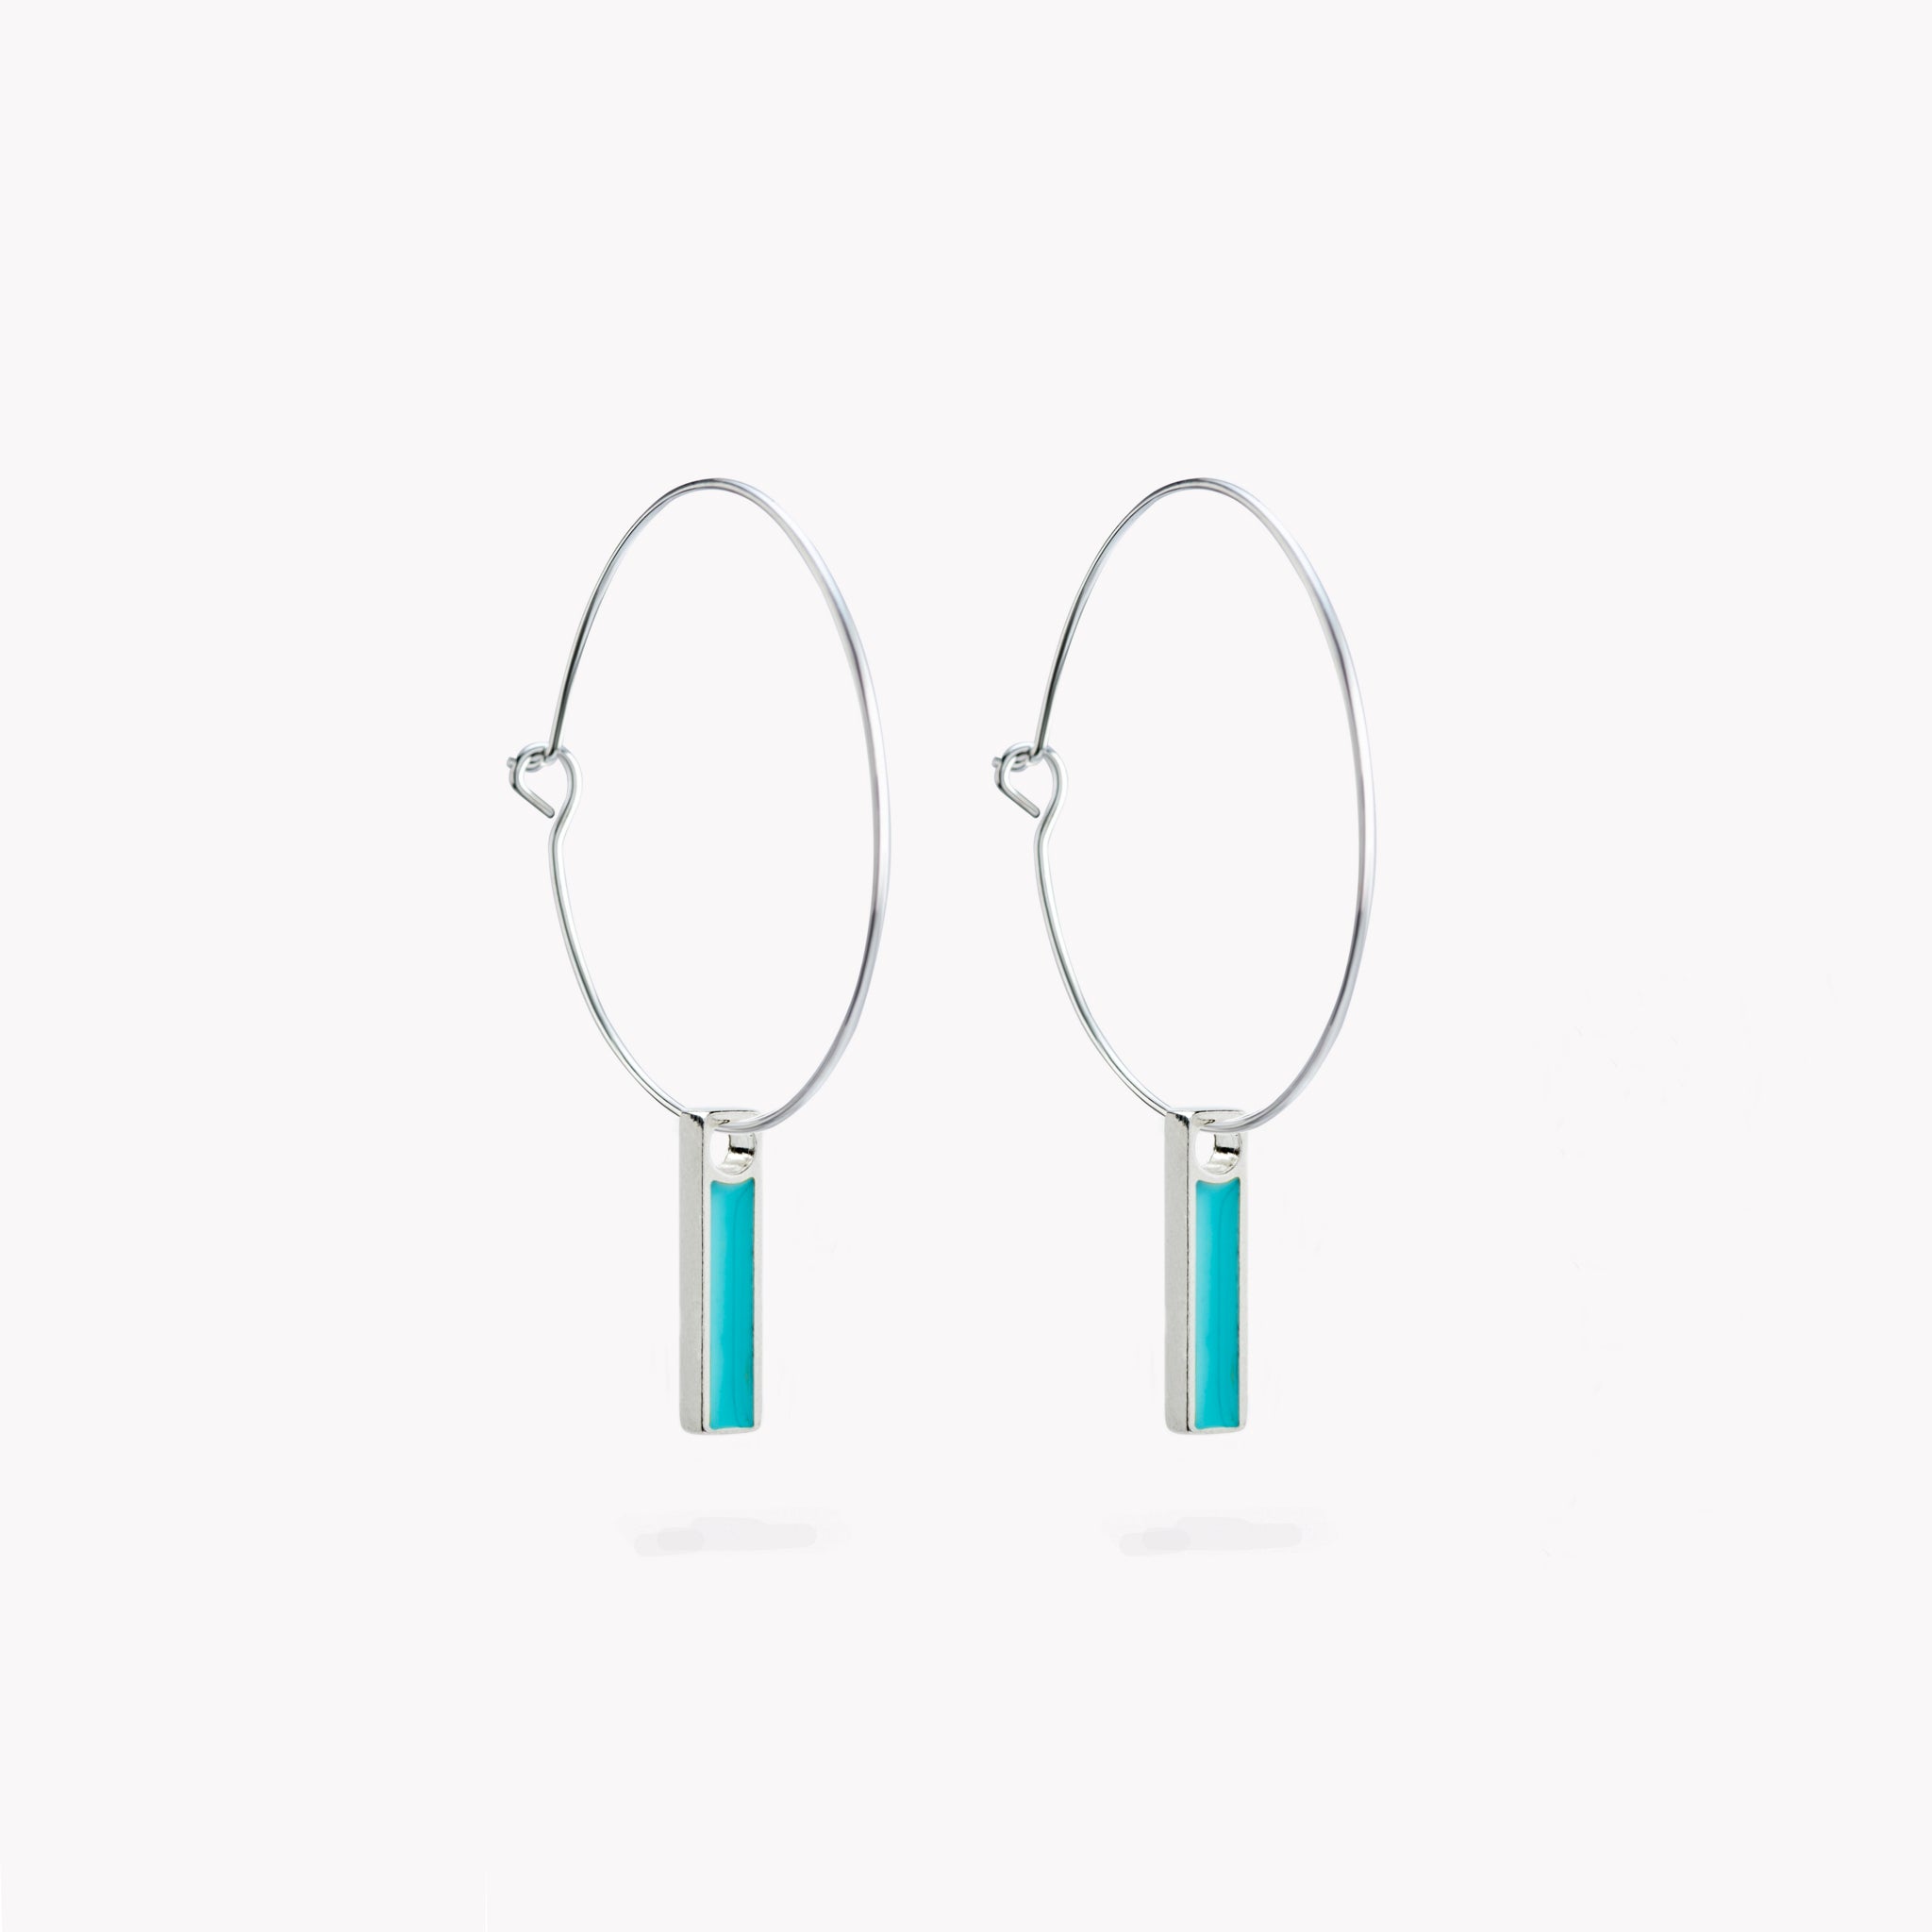 A pair of simple hoop earrings with a hanging turquoise bar.